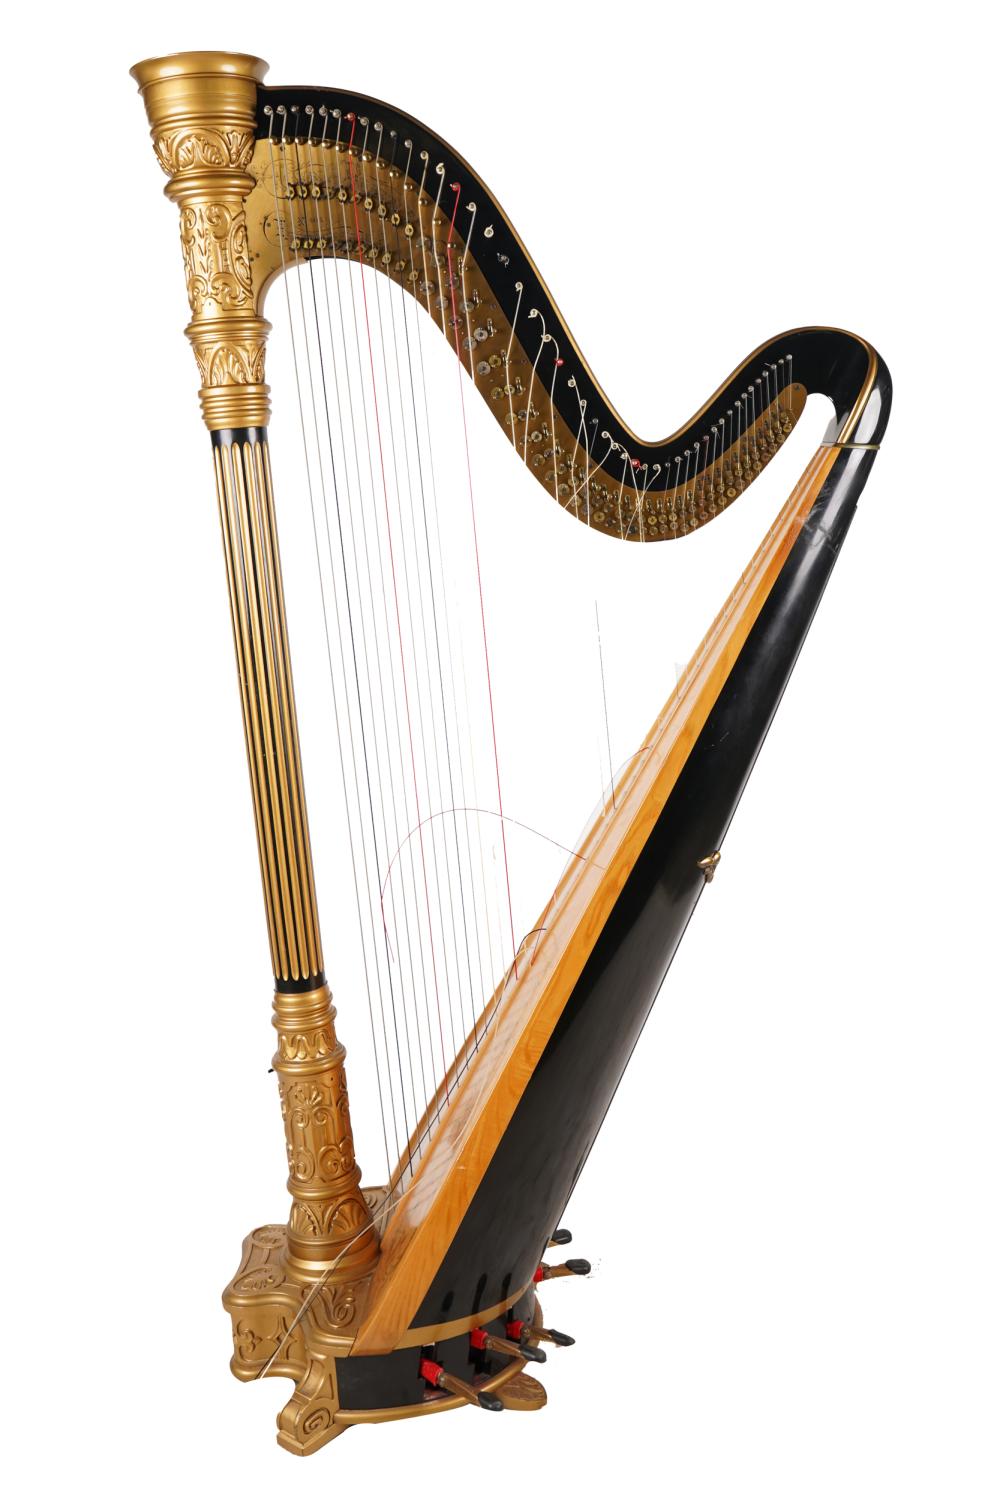 LYON & HEALY HARPtogether with fitted